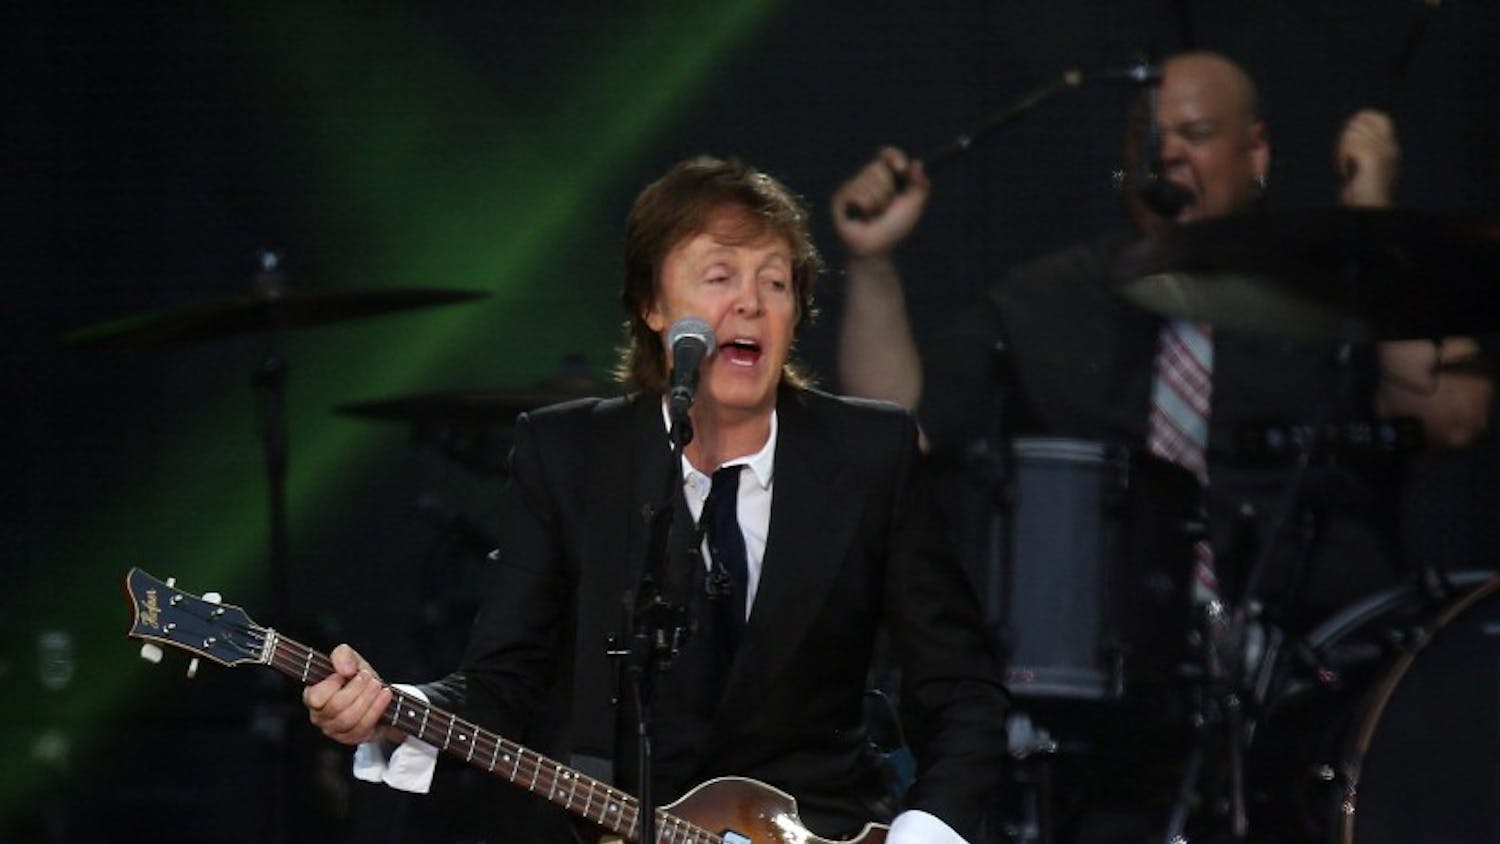 Paul McCartney headlines on the Land's End stage during the 6th annual Outside Lands Music and Arts Festival in Golden Gate Park in San Francisco, California, on Friday, August 9, 2013. The festival runs through Sunday and headliners include the Red Hot Chili Peppers and Nine Inch Nails. (Jane Tyska/Bay Area News Group/MCT)